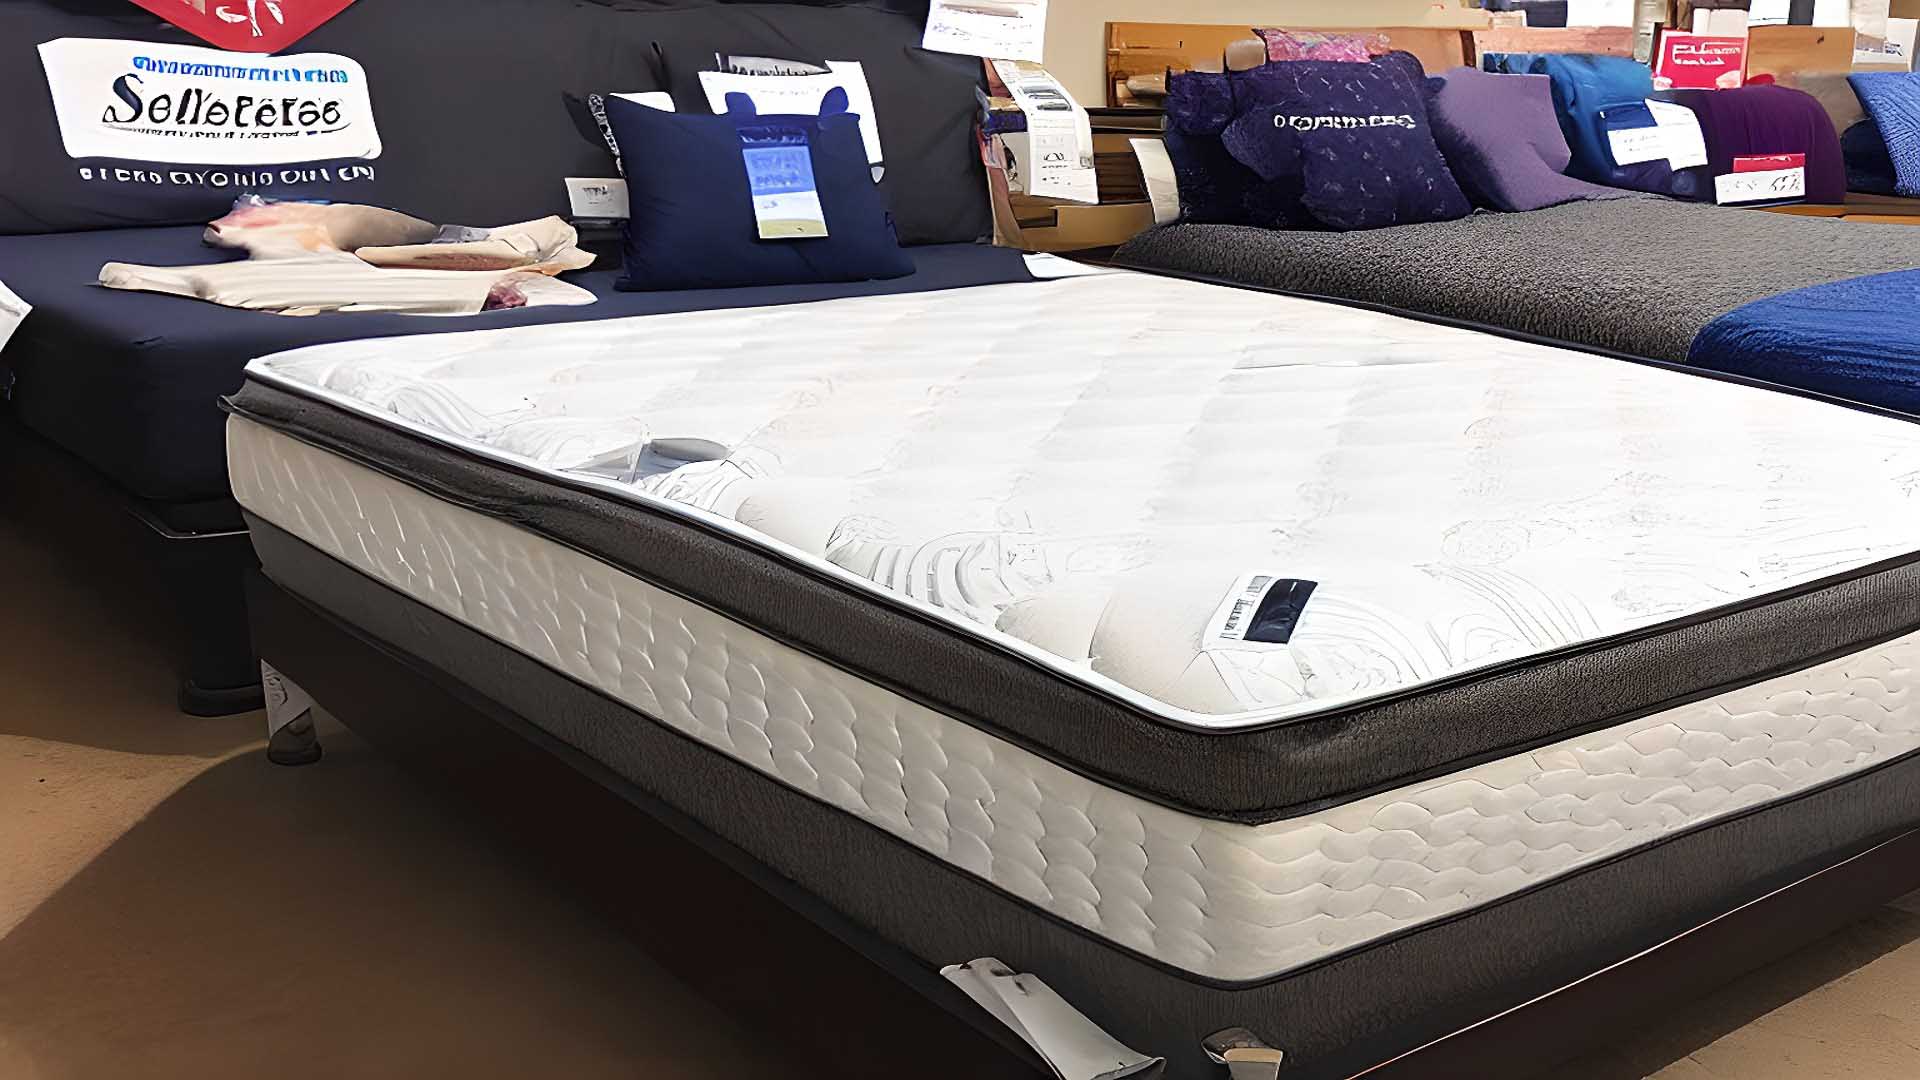 Mattress Sale in South Bend, Indiana